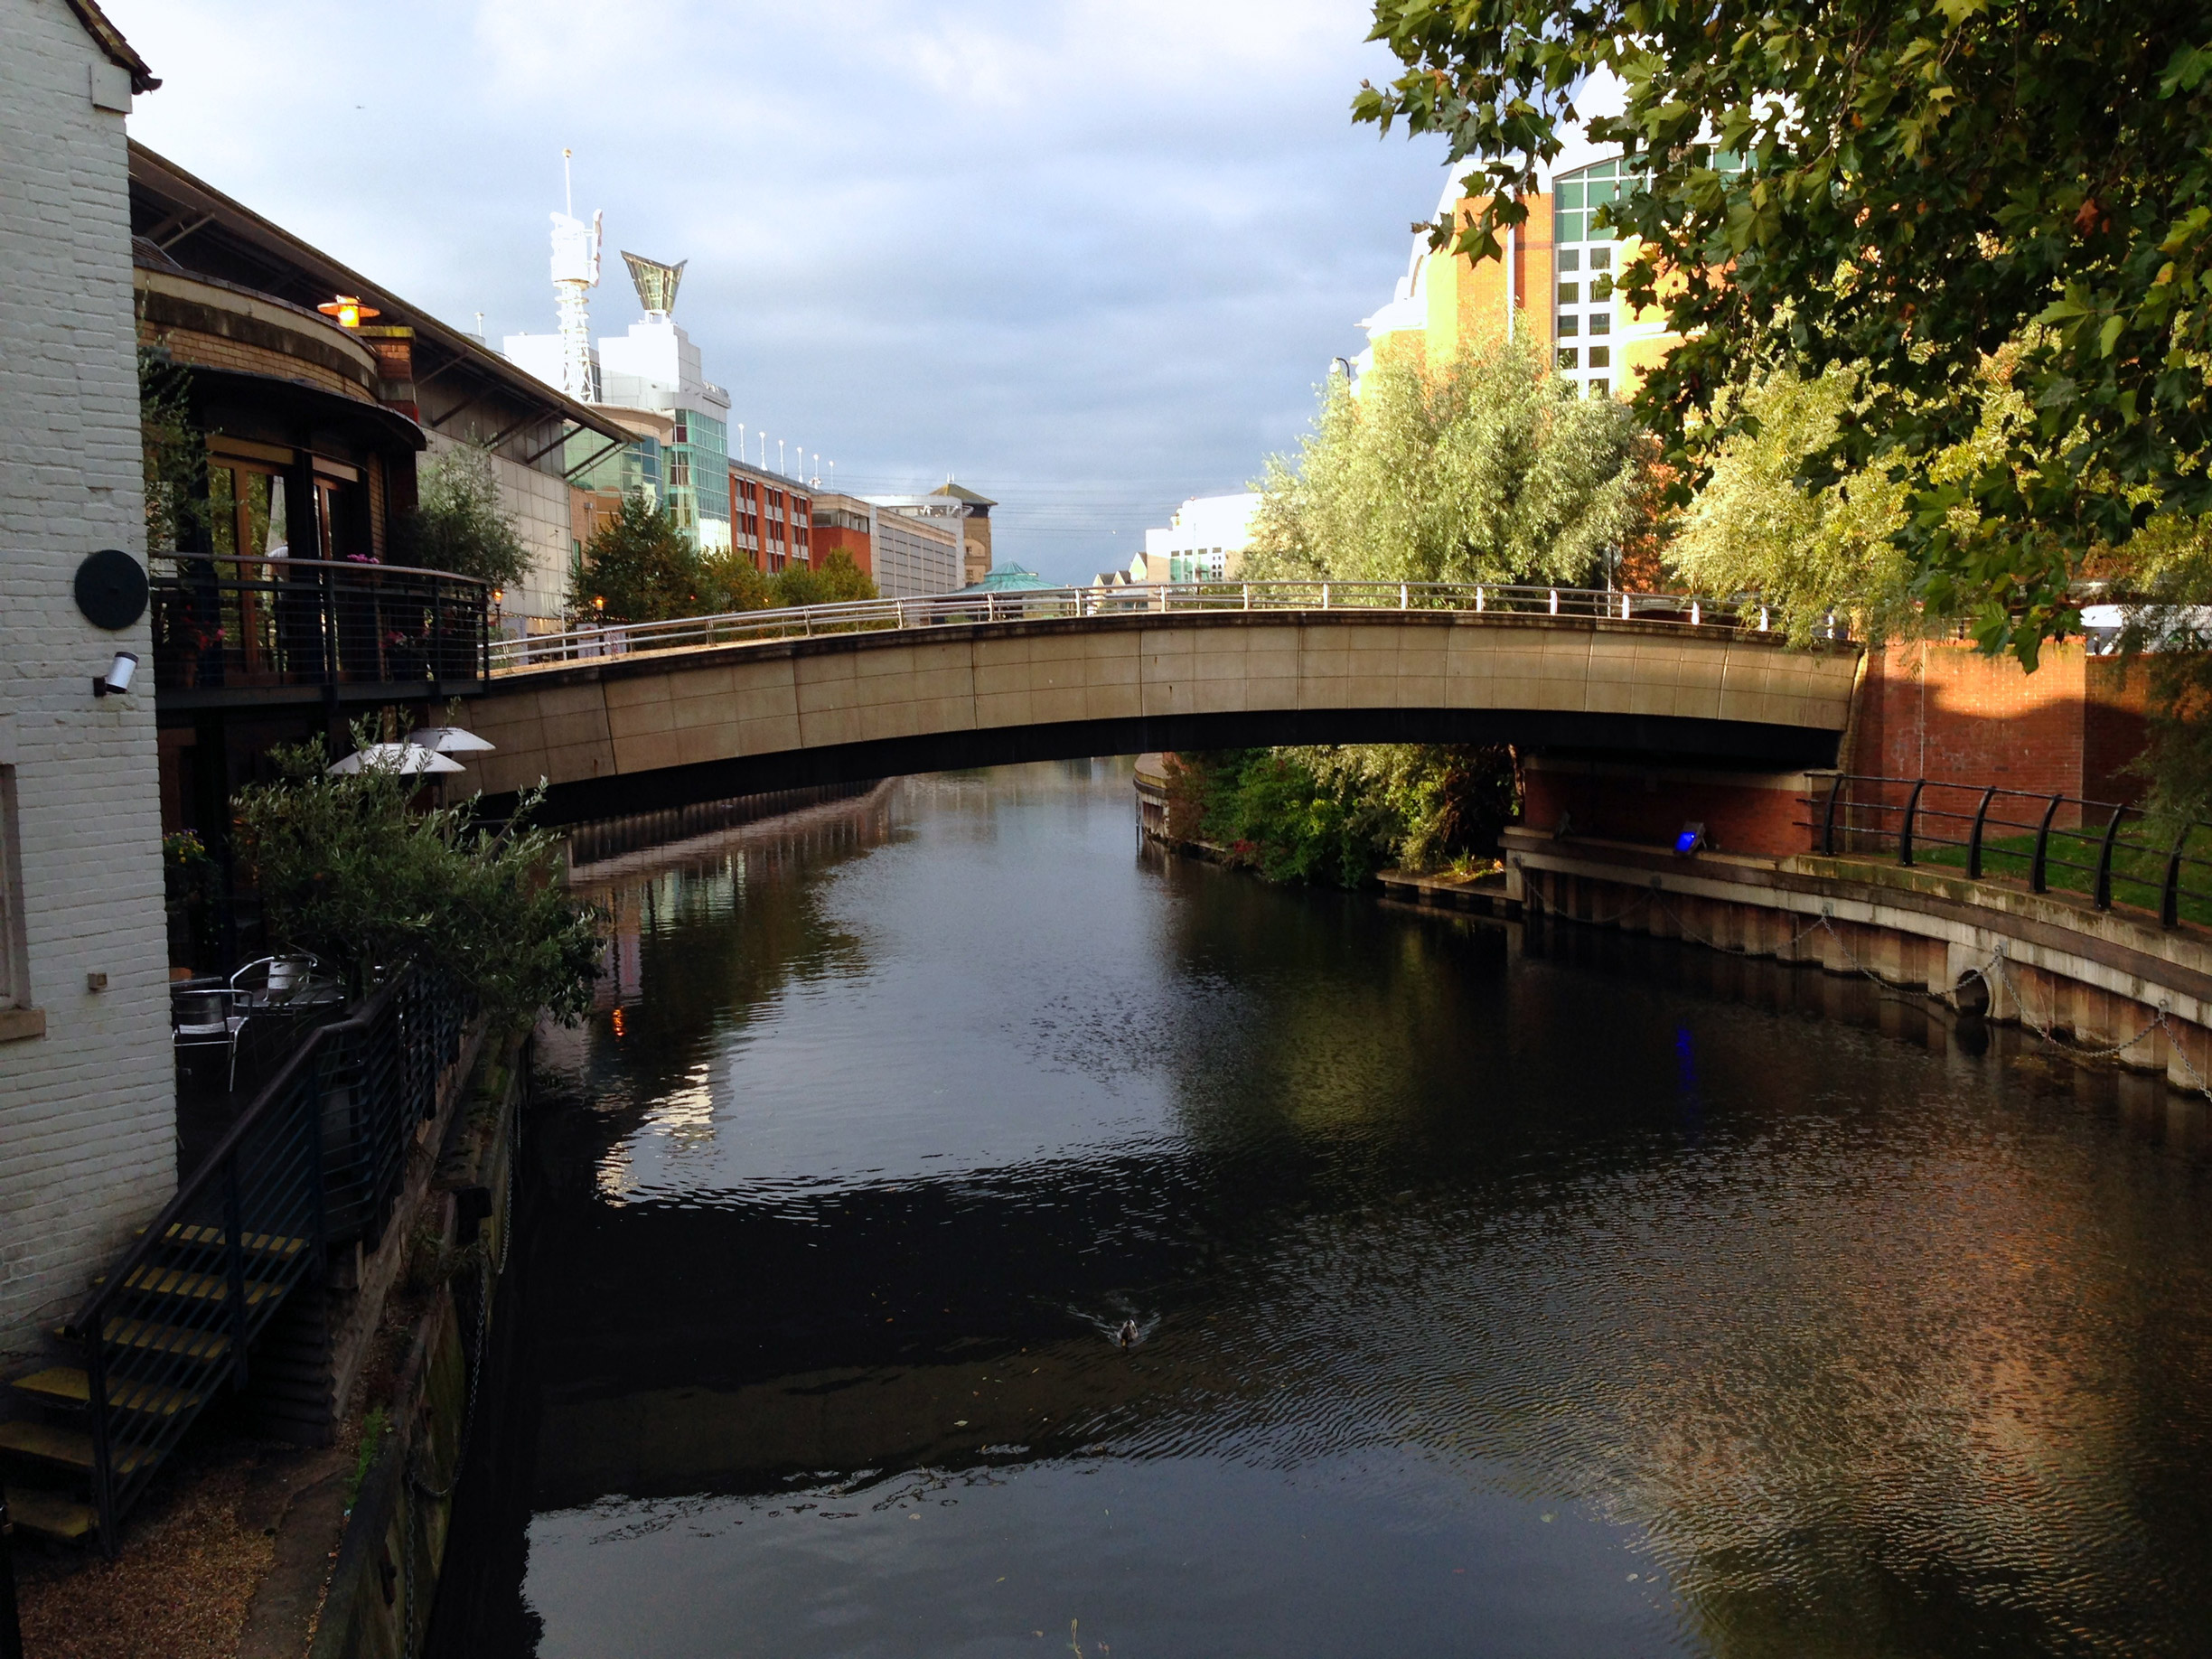 Canals in Reading - Leads to the Oracle shopping center